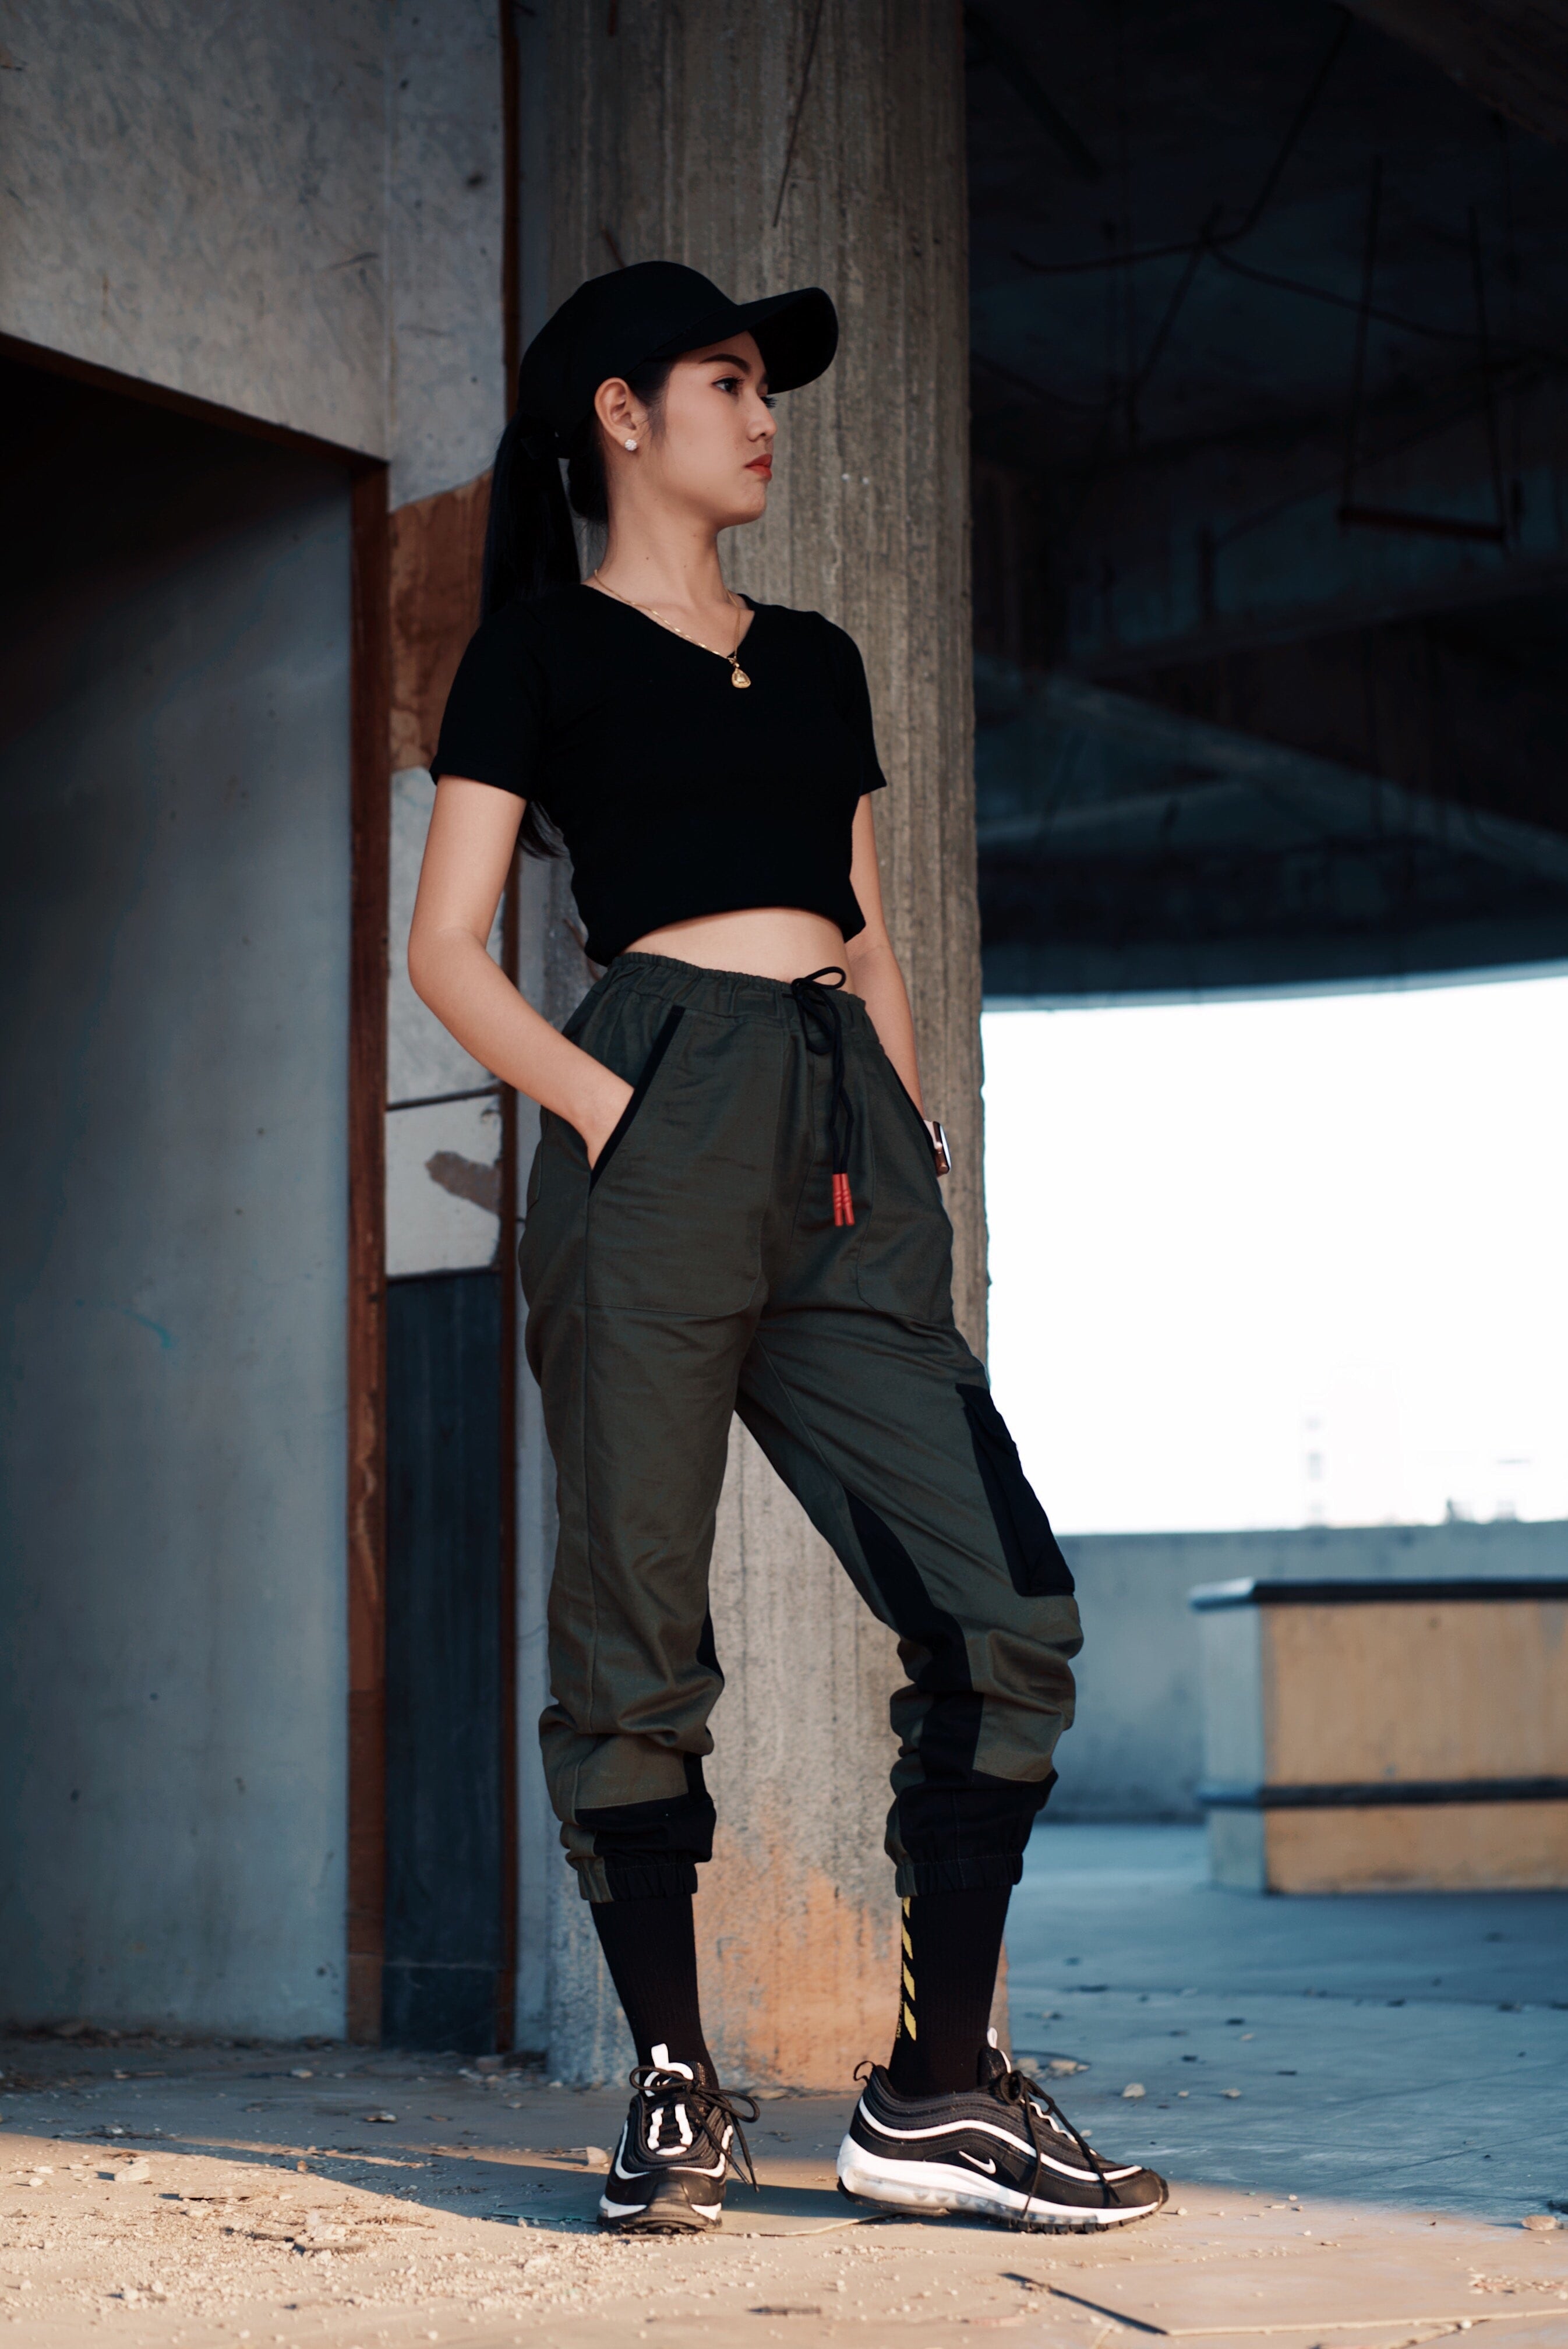 Women's Joggers Outfit Ideas: Stylish & Comfortable Looks - Nobero